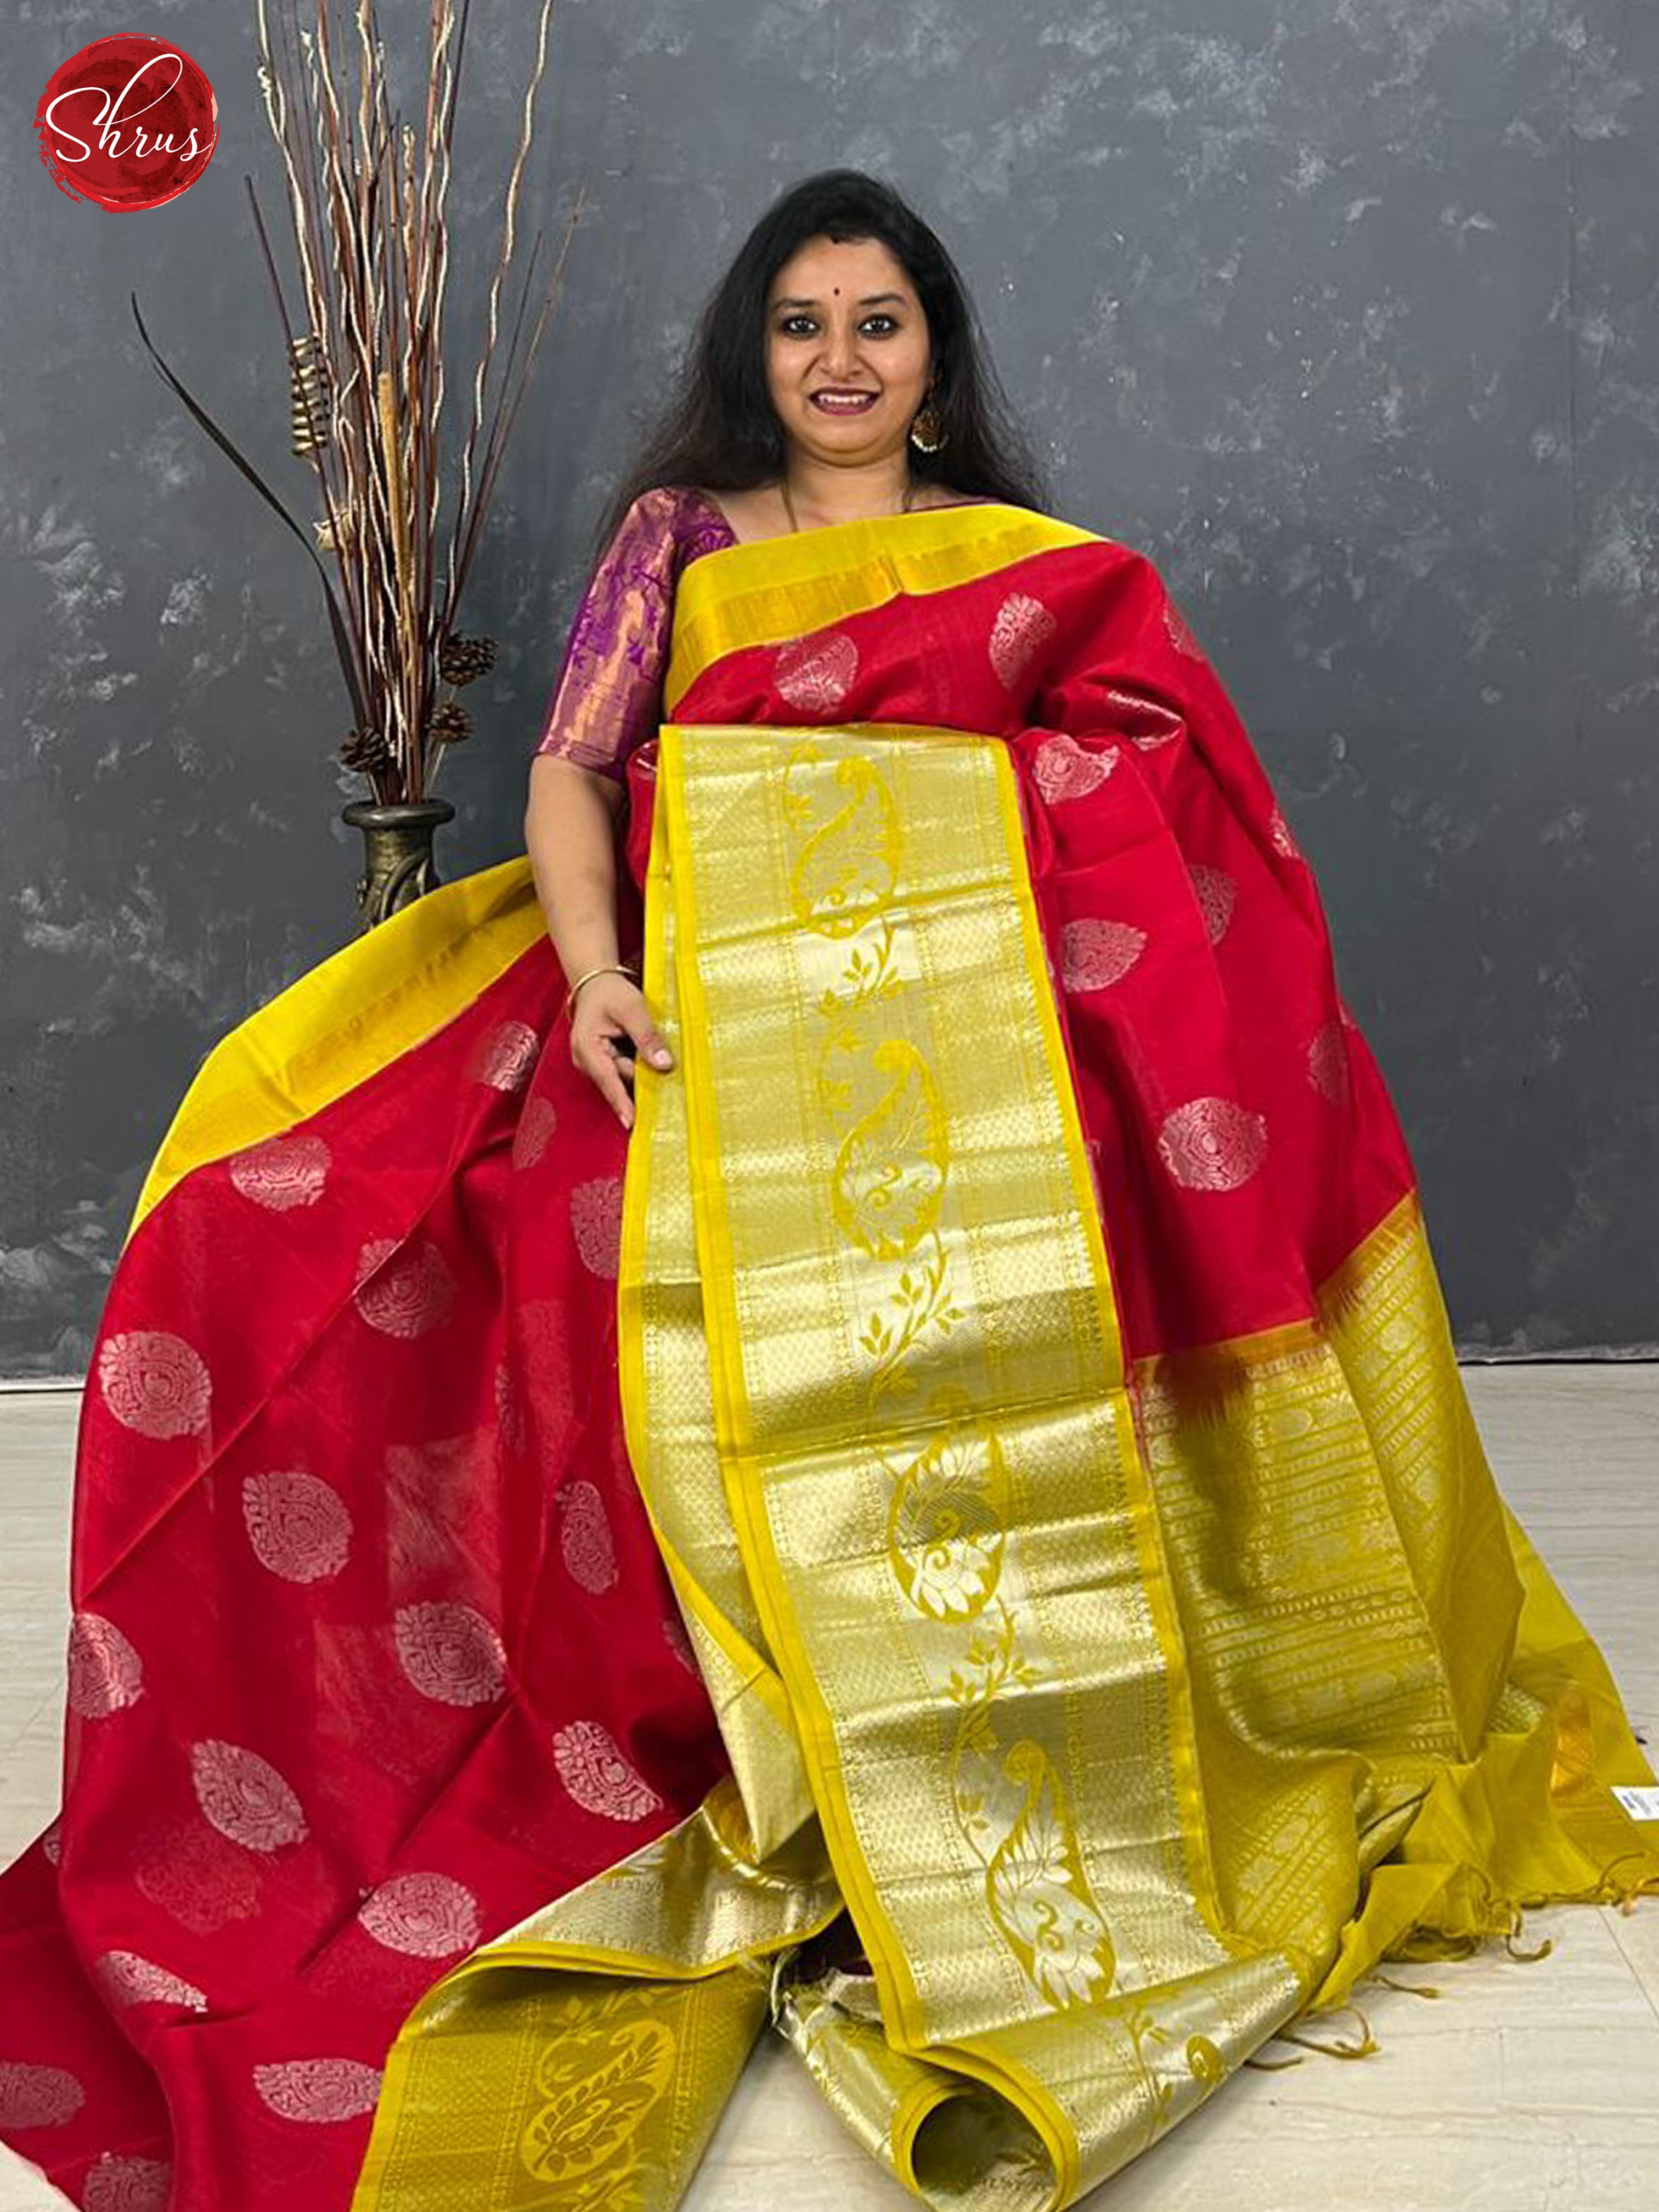 Red & Lime Yellow - Silk Cotton with zari woven floral motifs  on the body & Contrast Zari Border - Shop on ShrusEternity.com